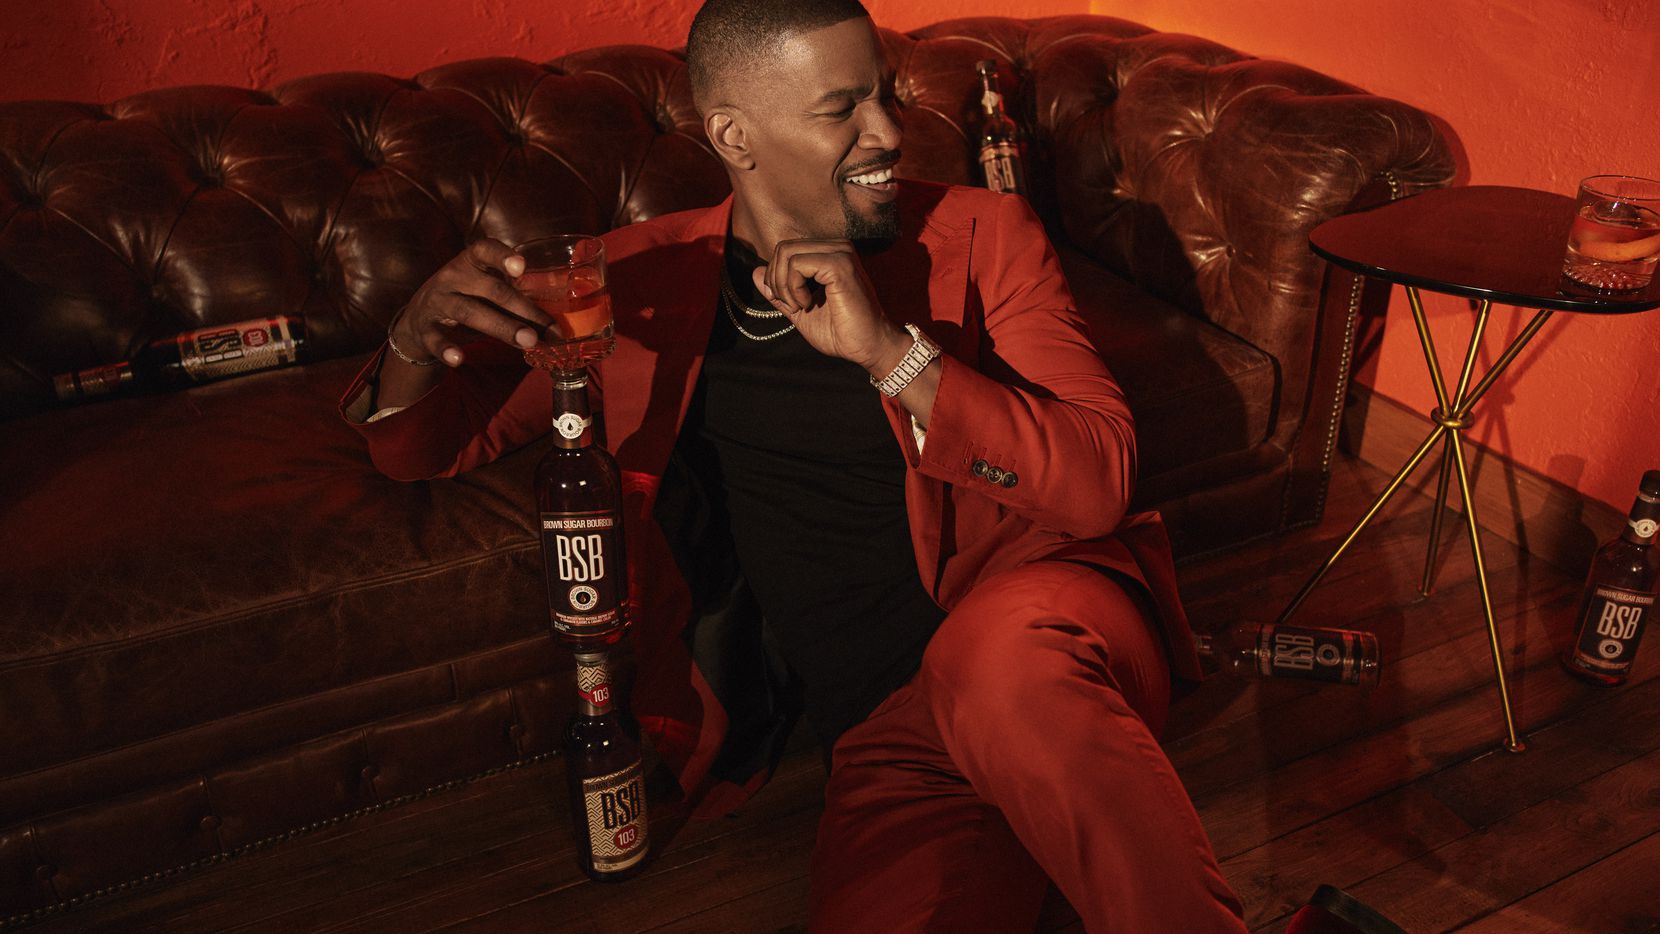 Actor Jamie Foxx has taken an ownership in BSB Spirits, a Texas company that makes two bourbons: Brown Sugar Bourbon and BSB 103.